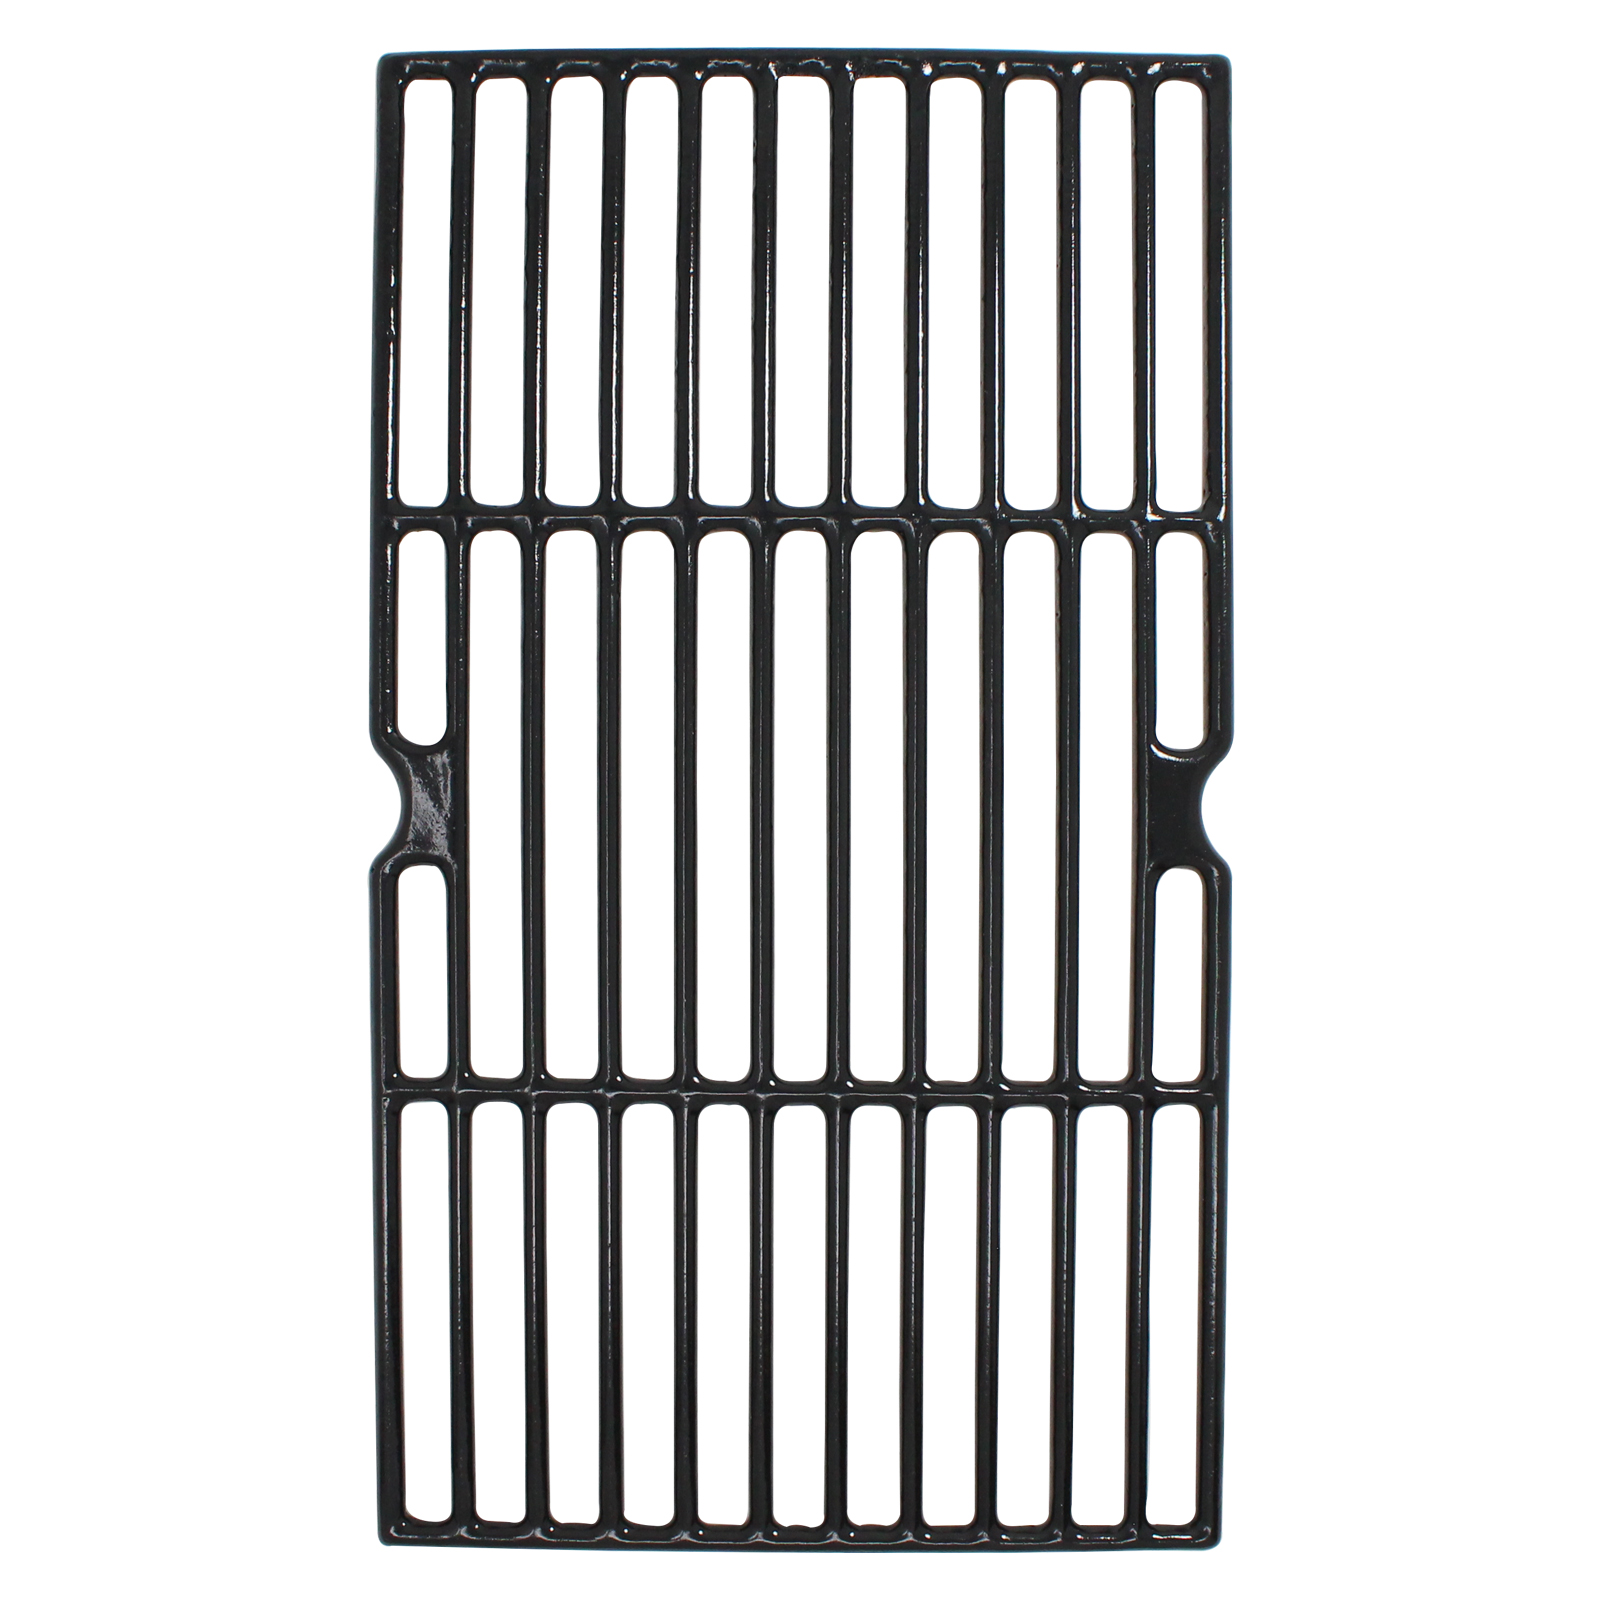 3-Pack BBQ Grill Cooking Grates Replacement Parts for Broil King 987747 - Compatible Barbeque Cast Iron Grid 16 3/4" - image 2 of 4